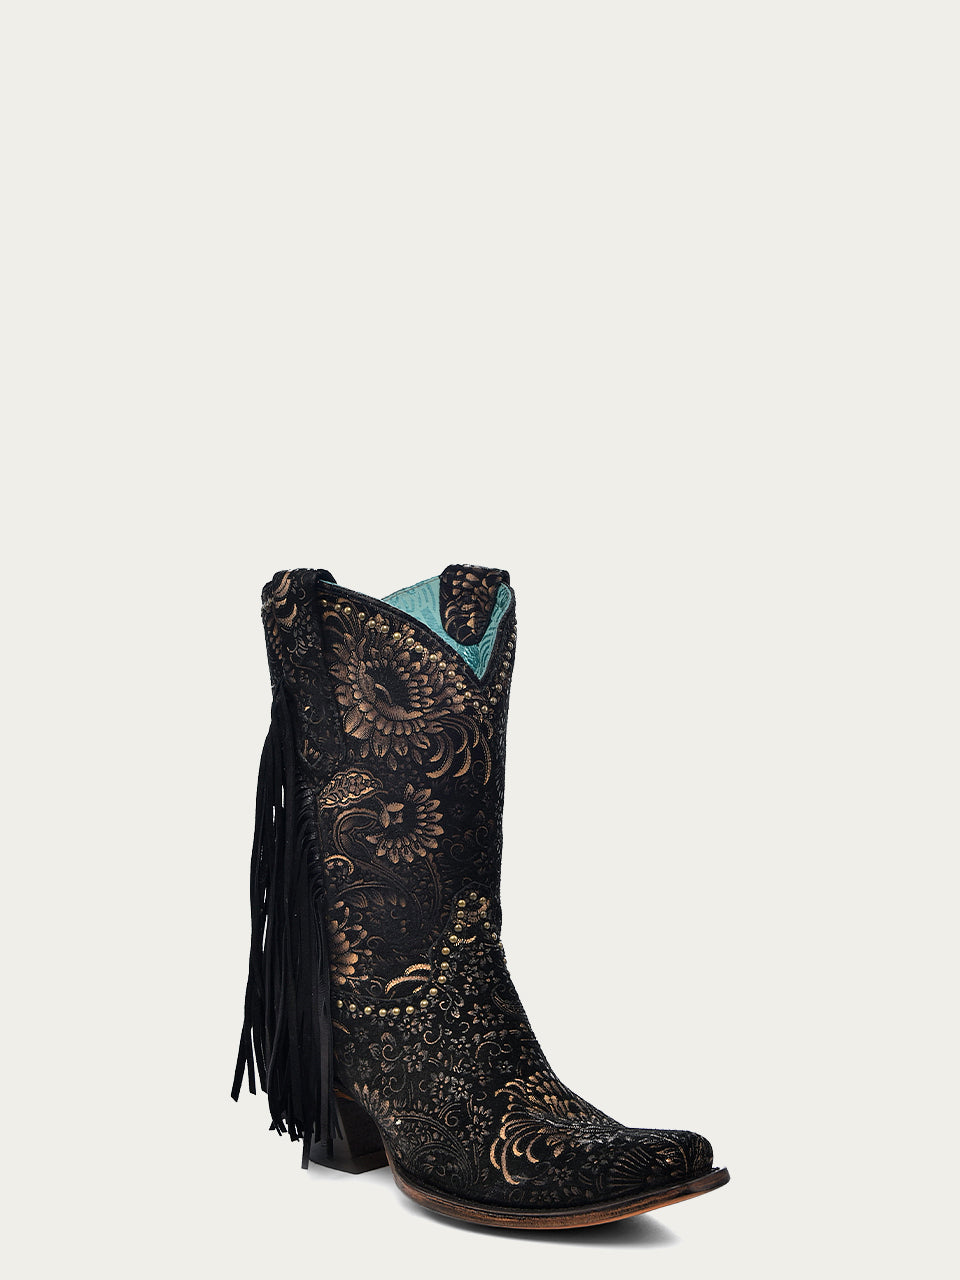 A4492 - WOMEN'S GOLD STAMPED FLORAL WITH FRINGE BLACK SUEDE NARROW SQUARE TOE ANKLE BOOT